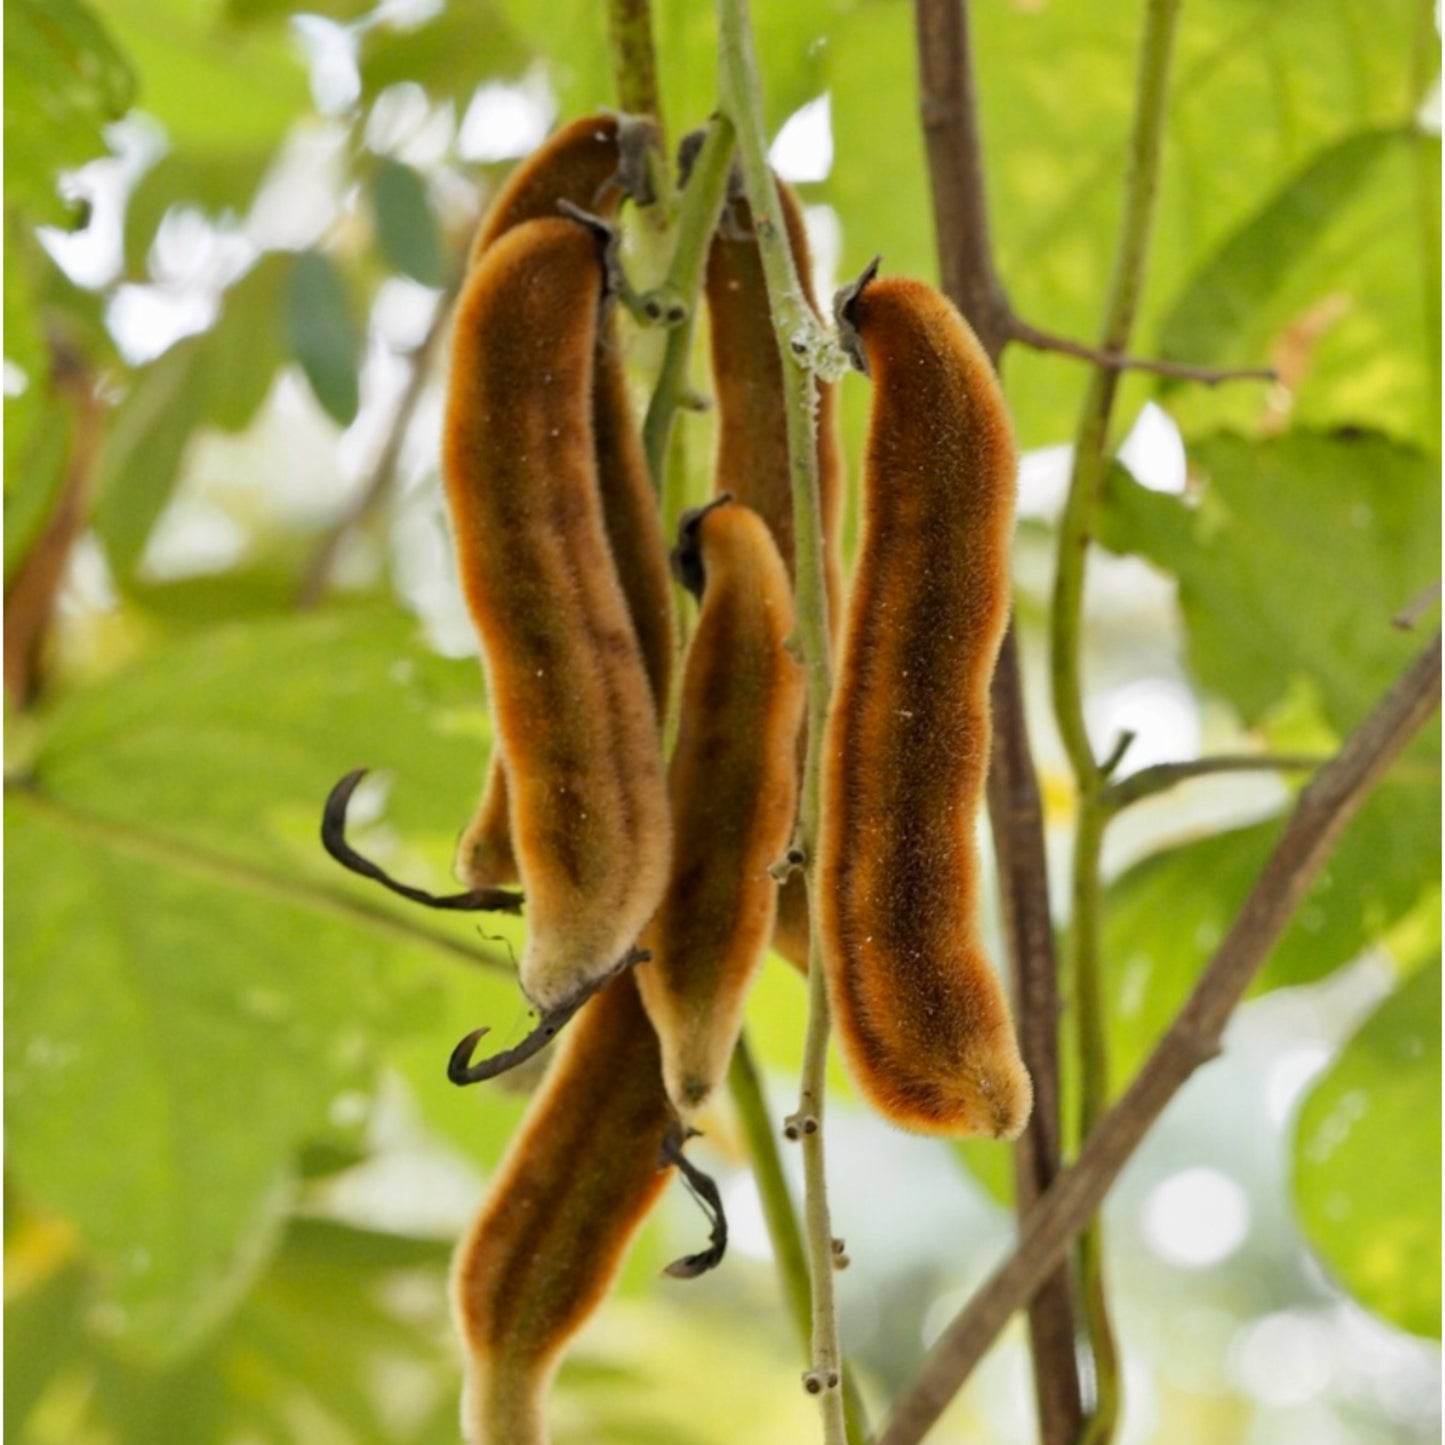 4 Mucuna Pruriens Extract 20:1 - Four Ingredients